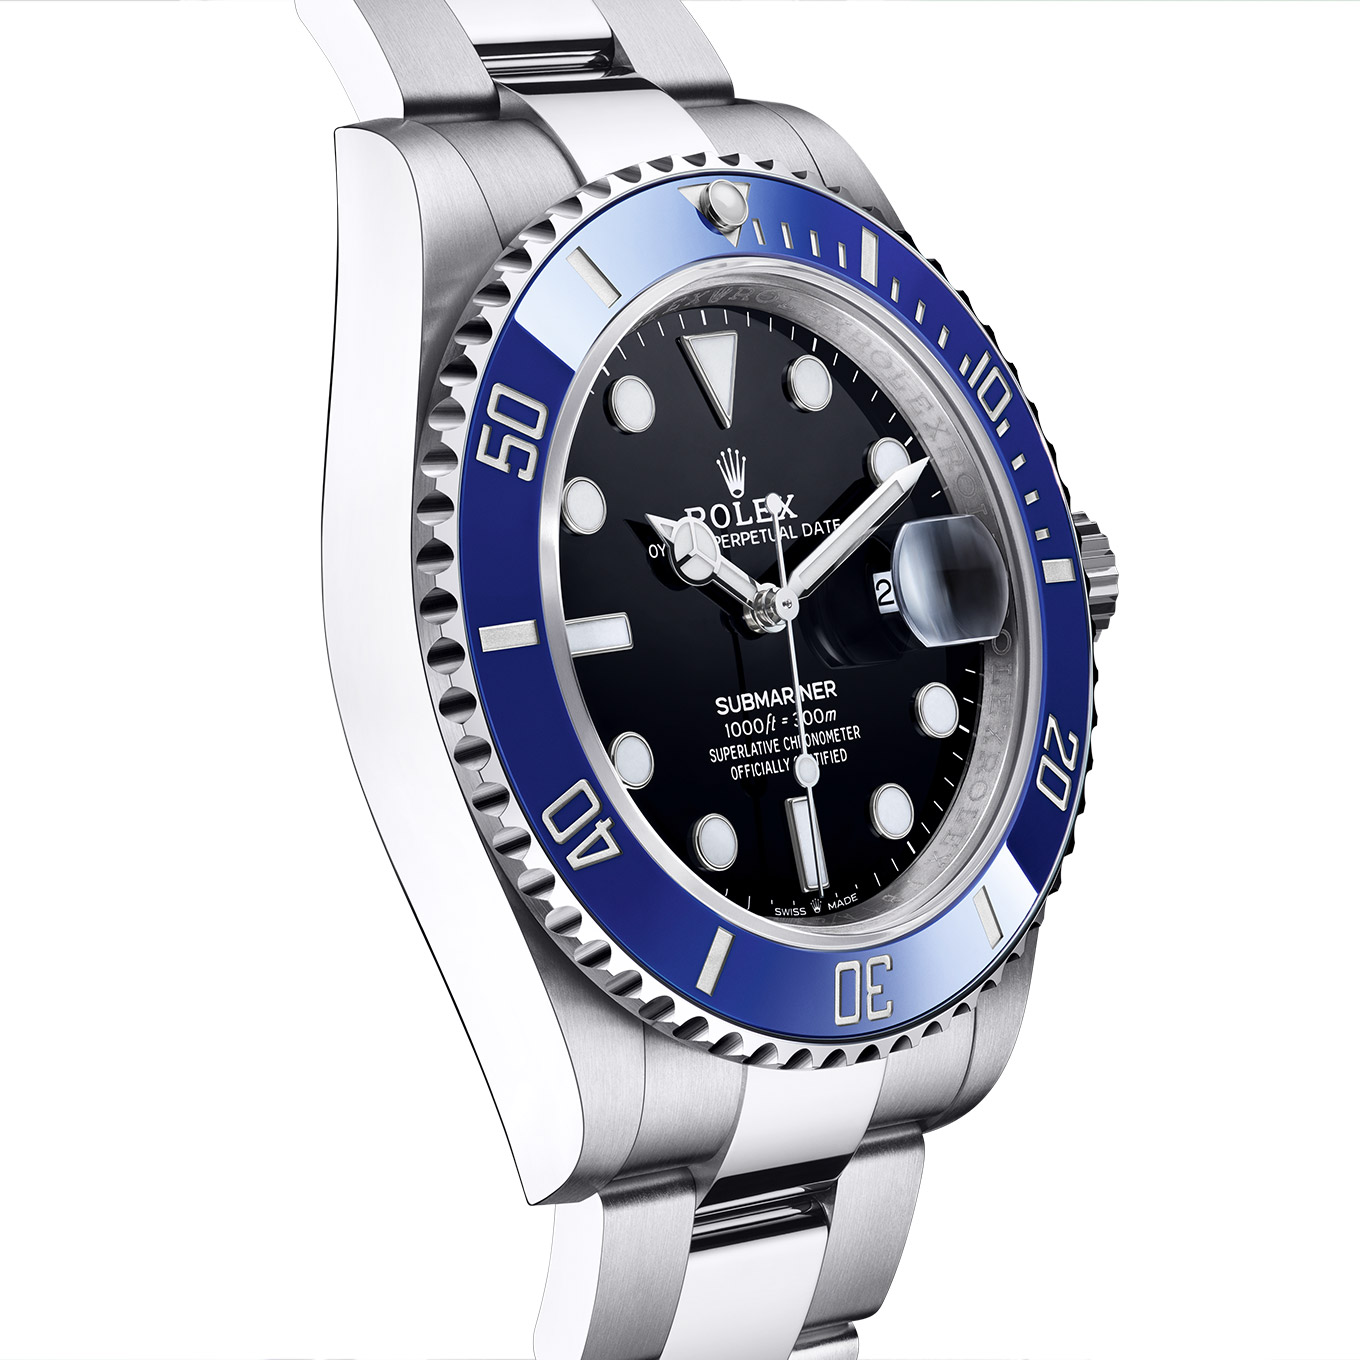 Rolex Submariner - The Reference Among 